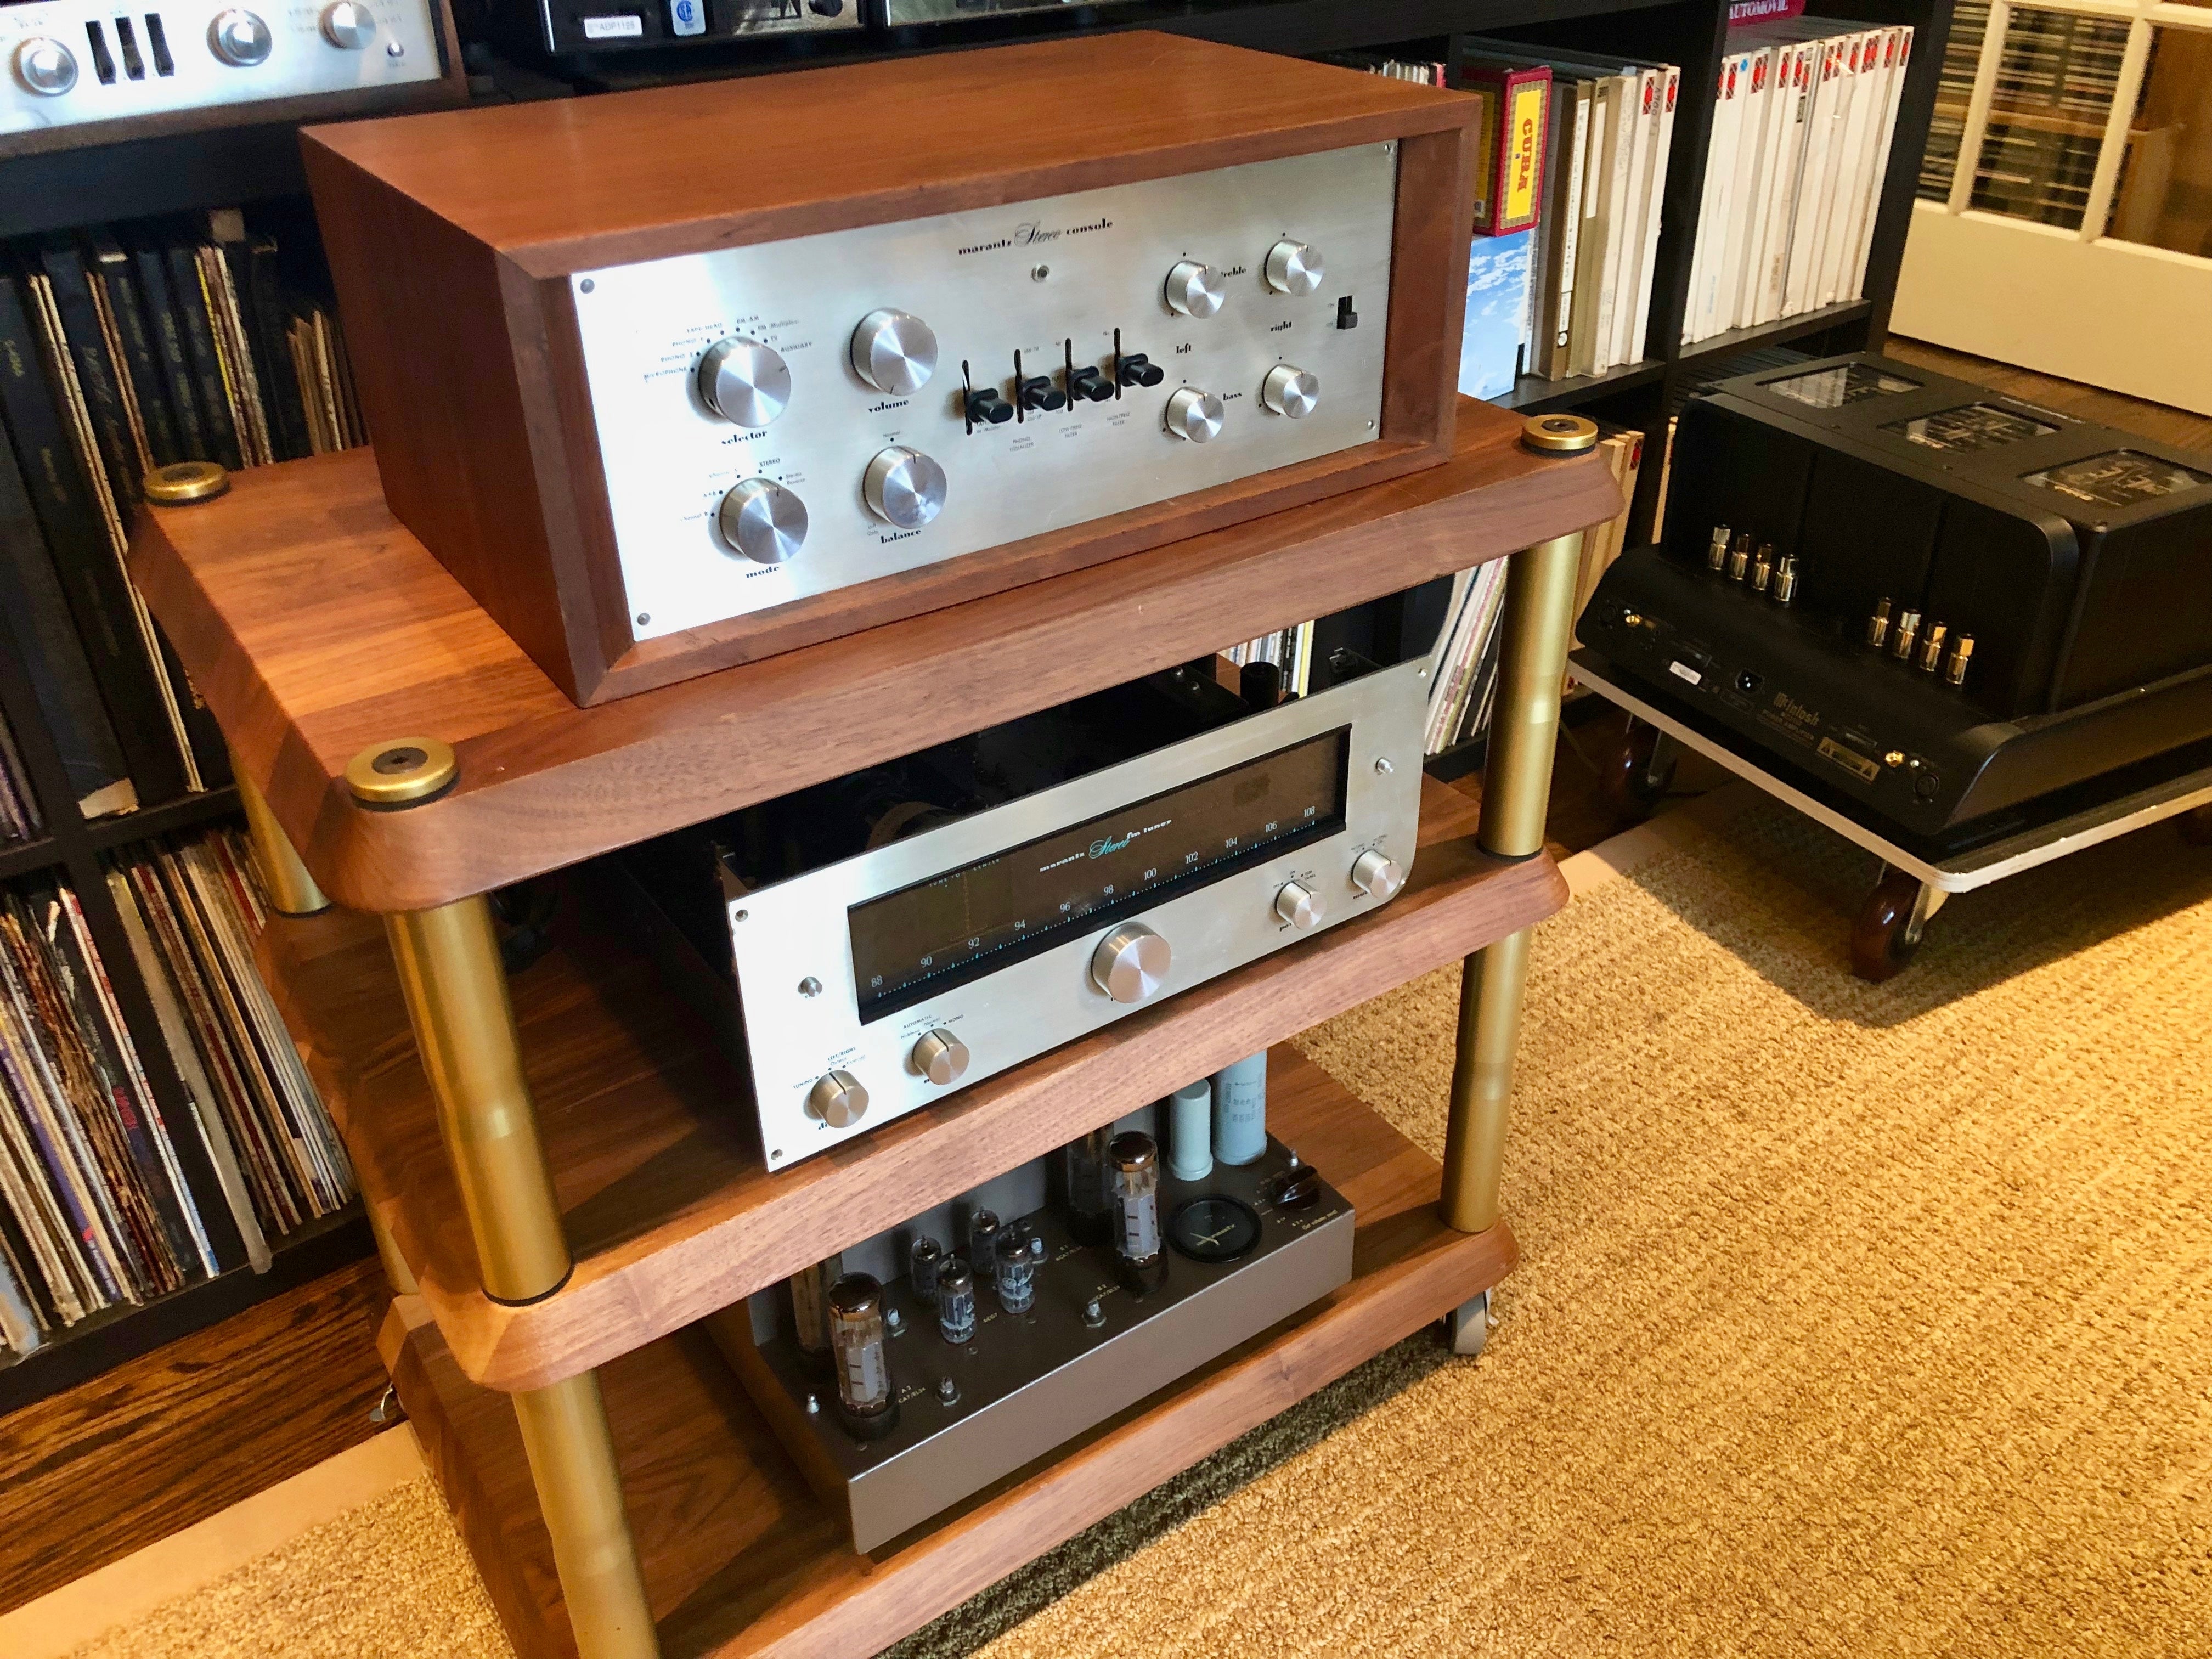 Many folks consider this system to be the holy grail of vintage American HiFi